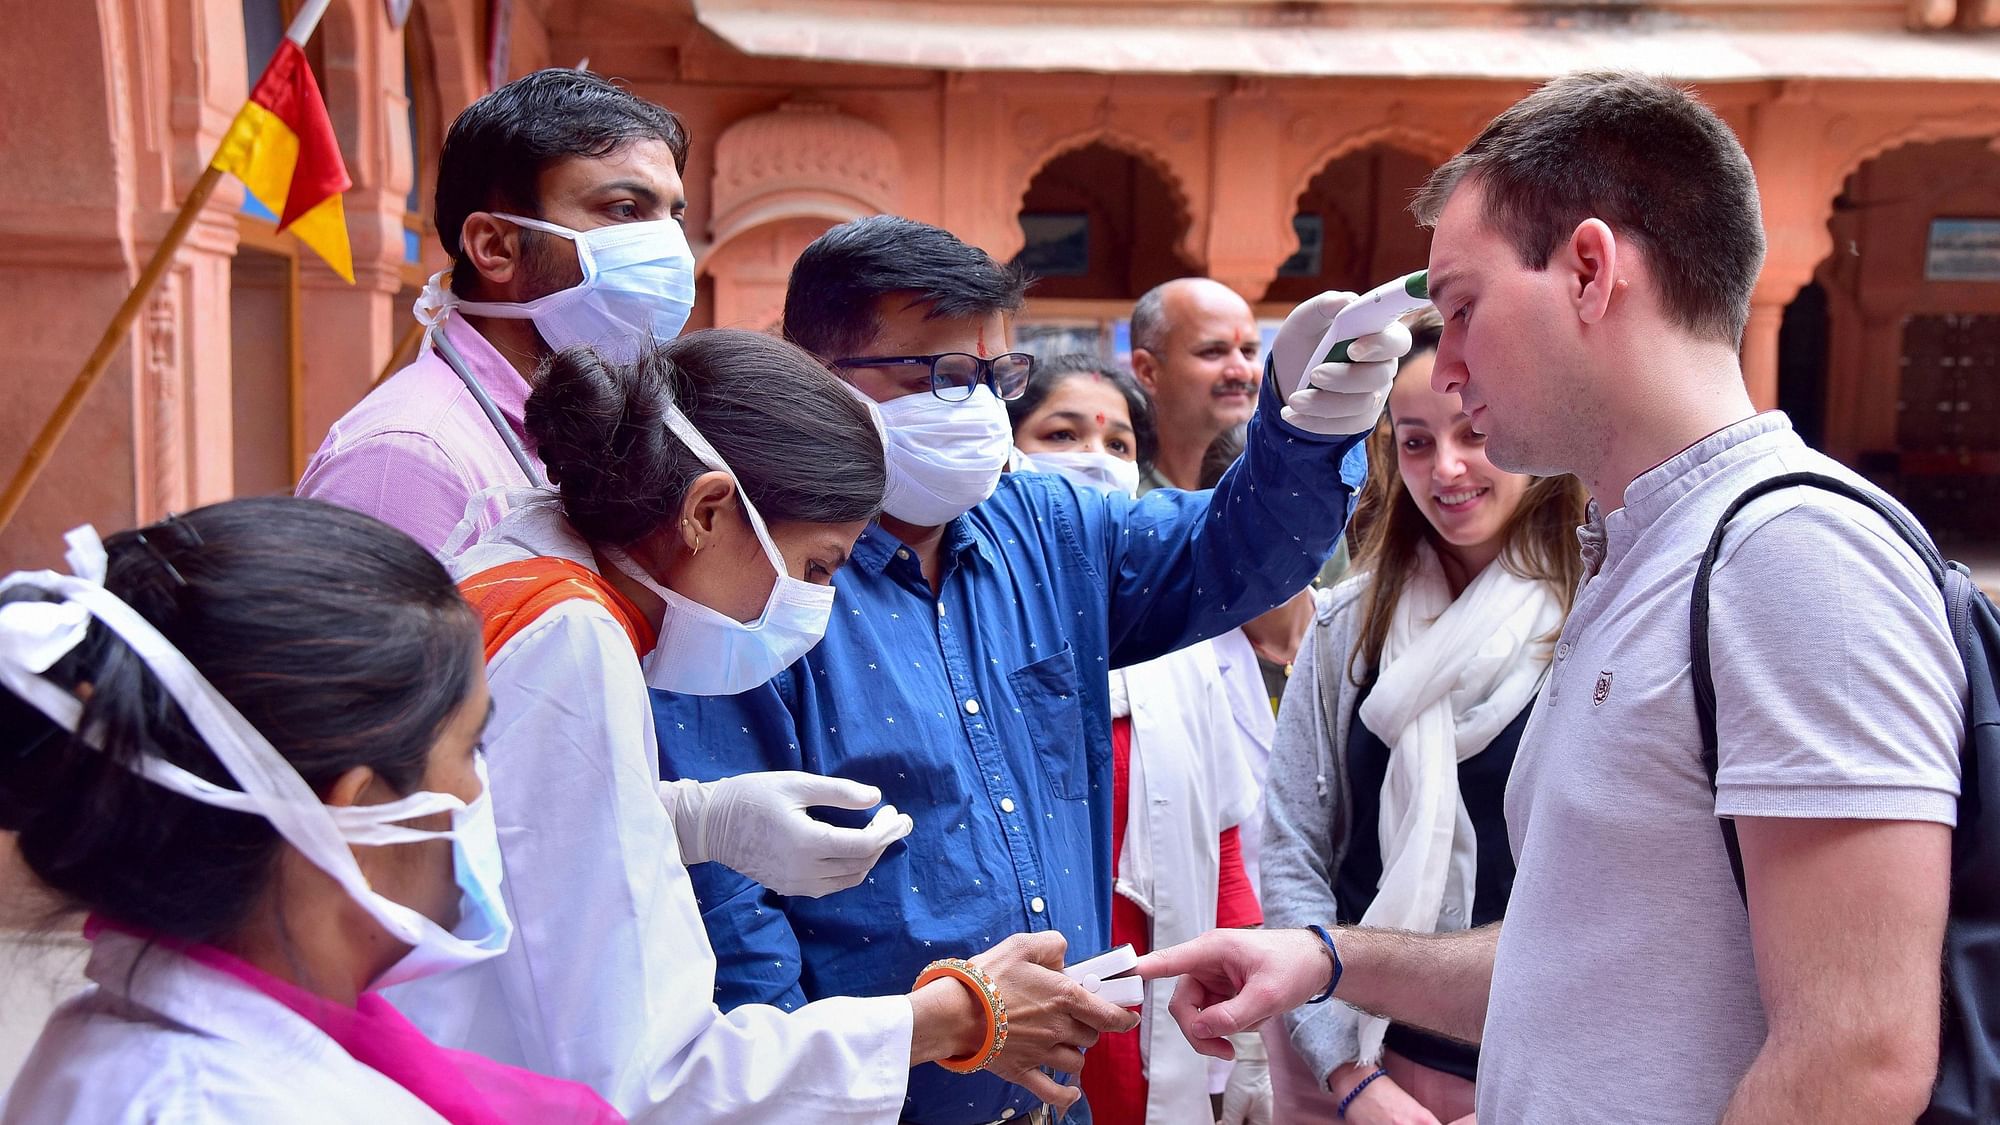 Medical officials check tourists in wake of the deadly coronavirus, at Junagarh fort in Bikaner, Wednesday, March 11, 2020.